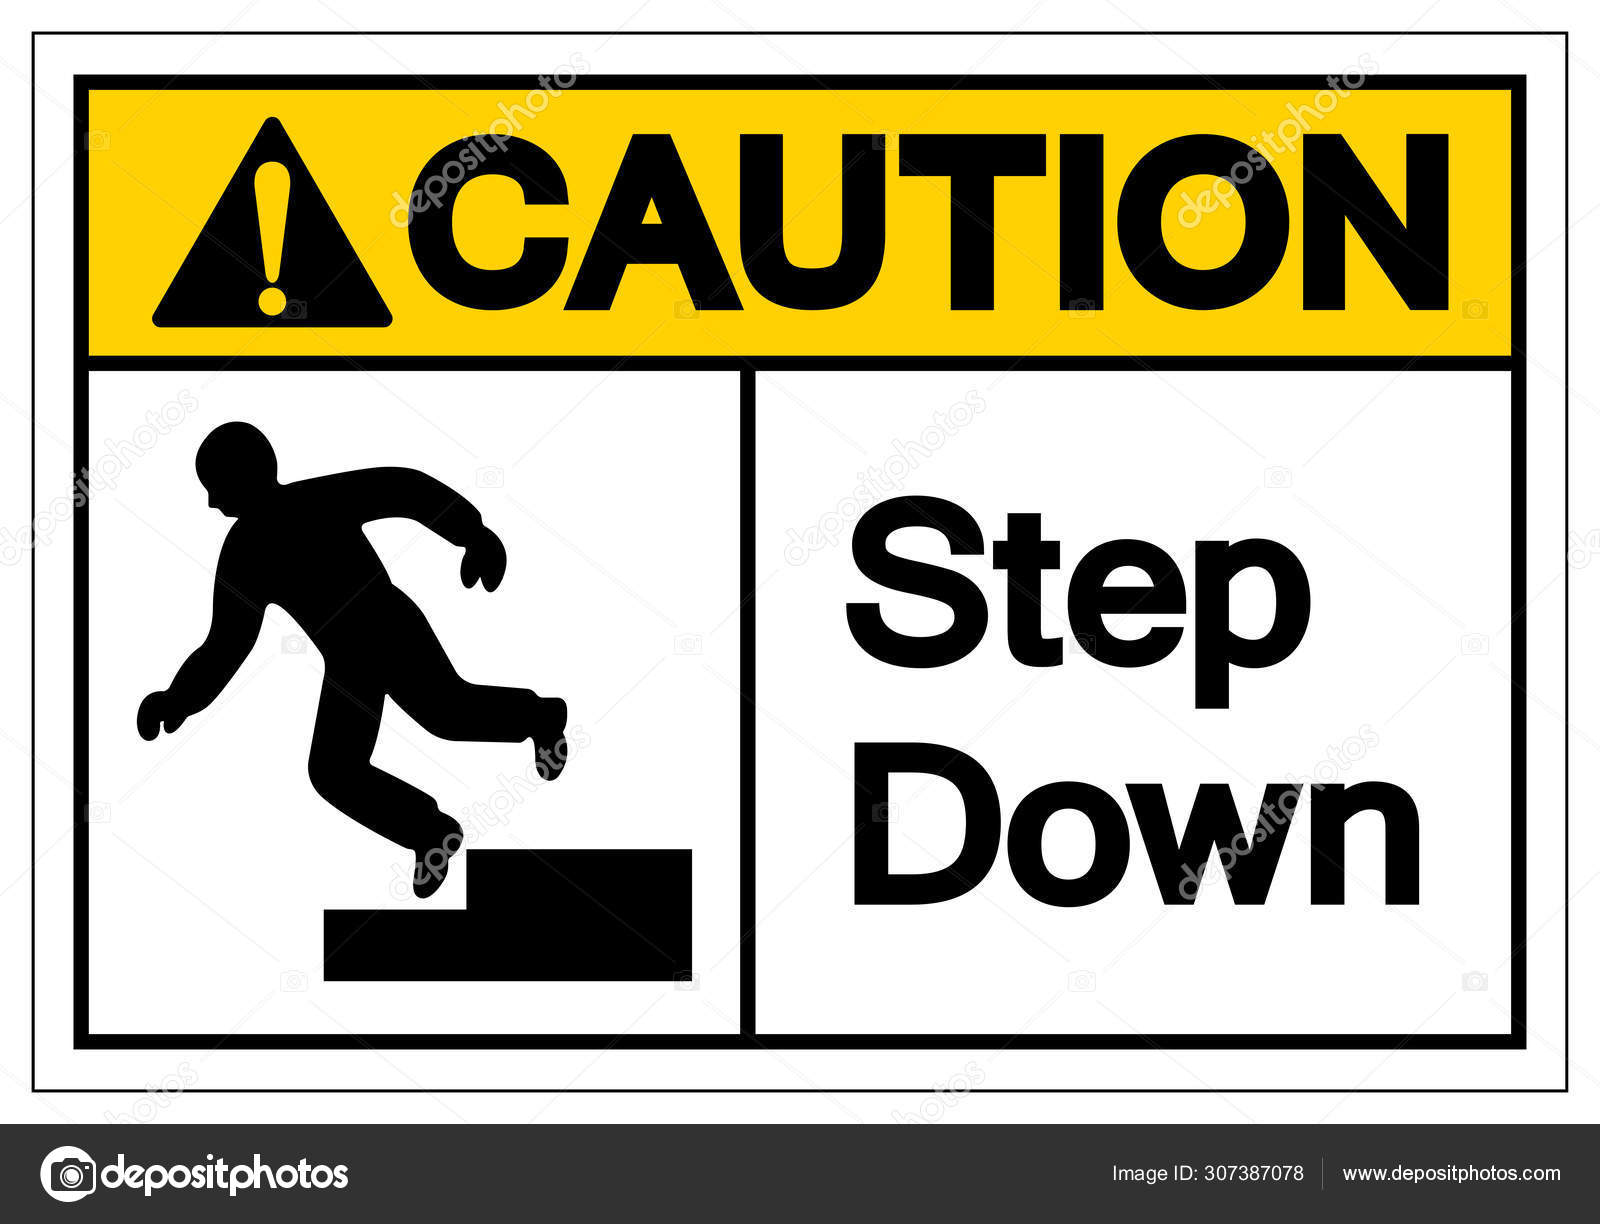 Caution Step Down MAG-NEATO'S™ Vinyl Magnet Sign 